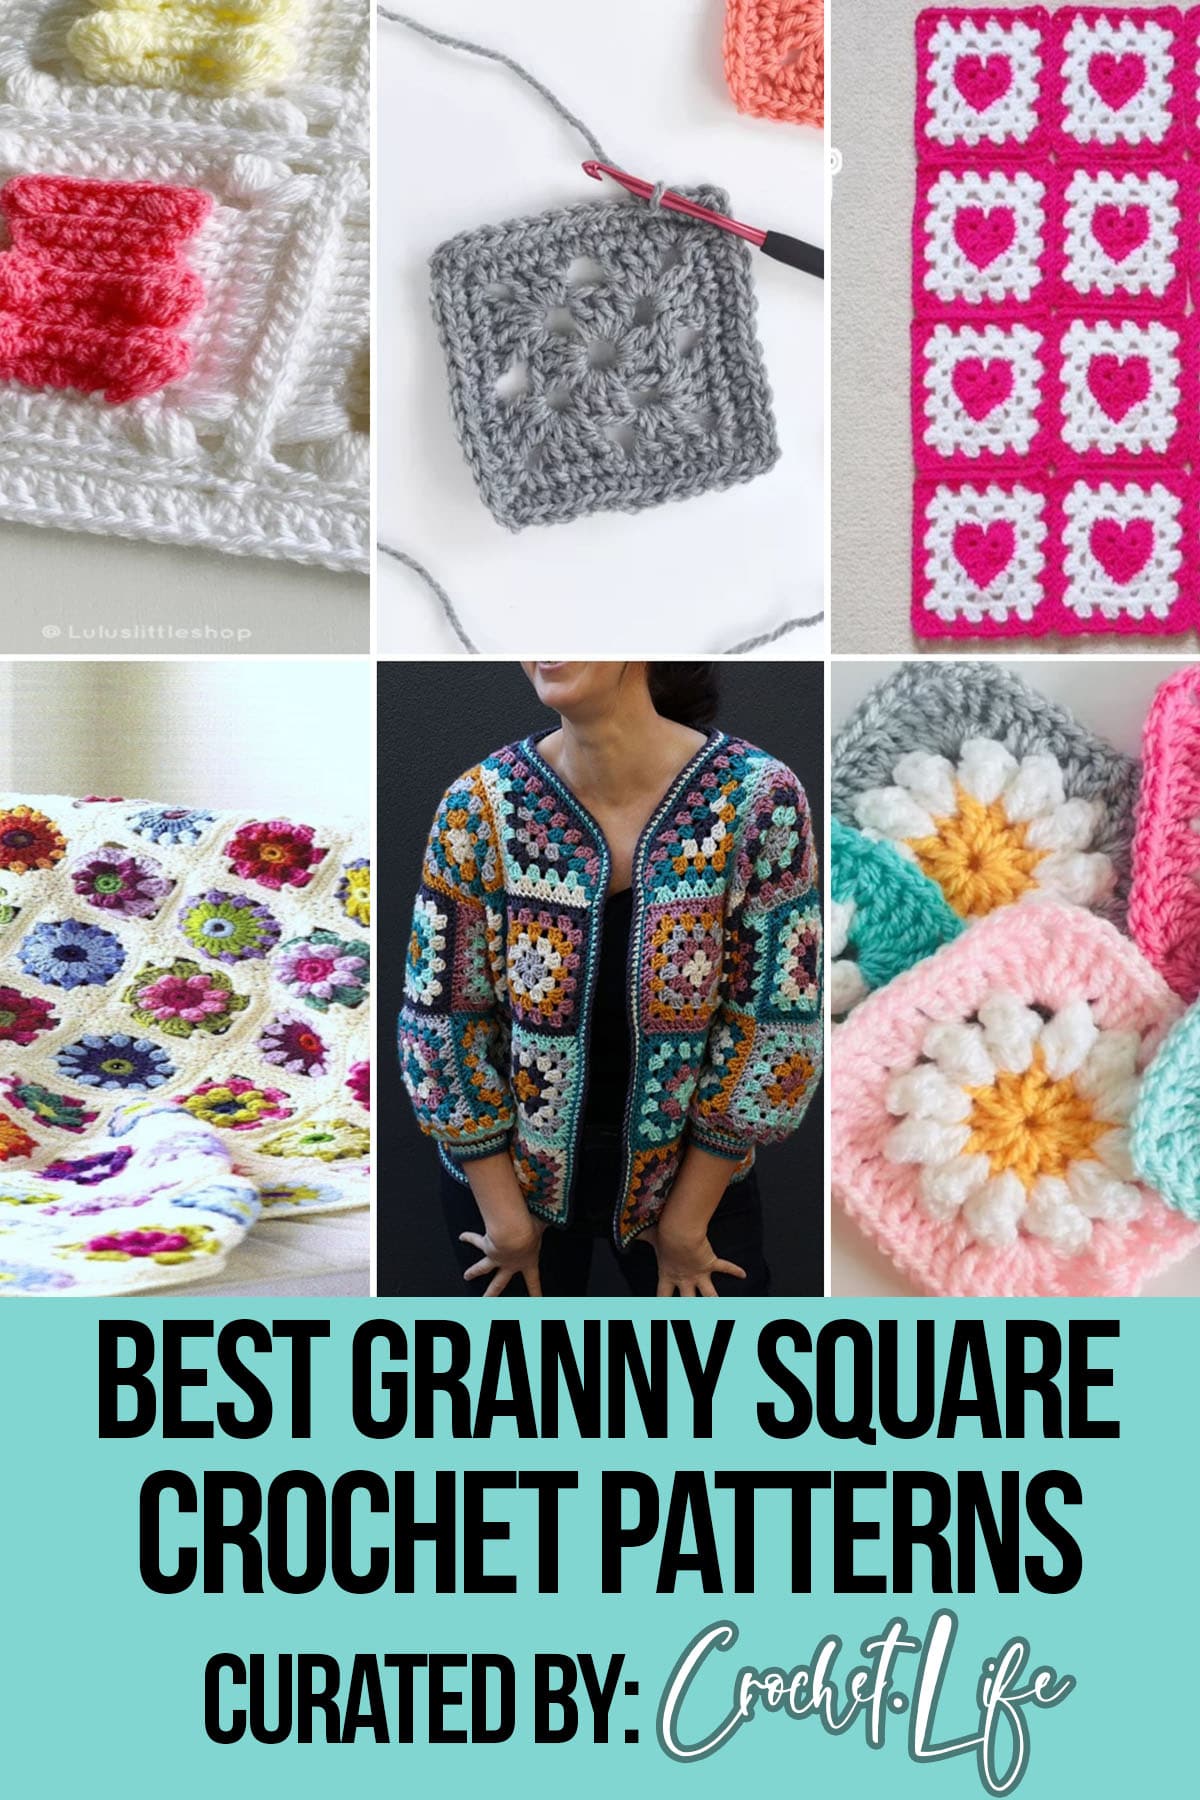 photo collage of crochet granny square patterns with text which reads best granny square crochet patterns curated by crochet.life